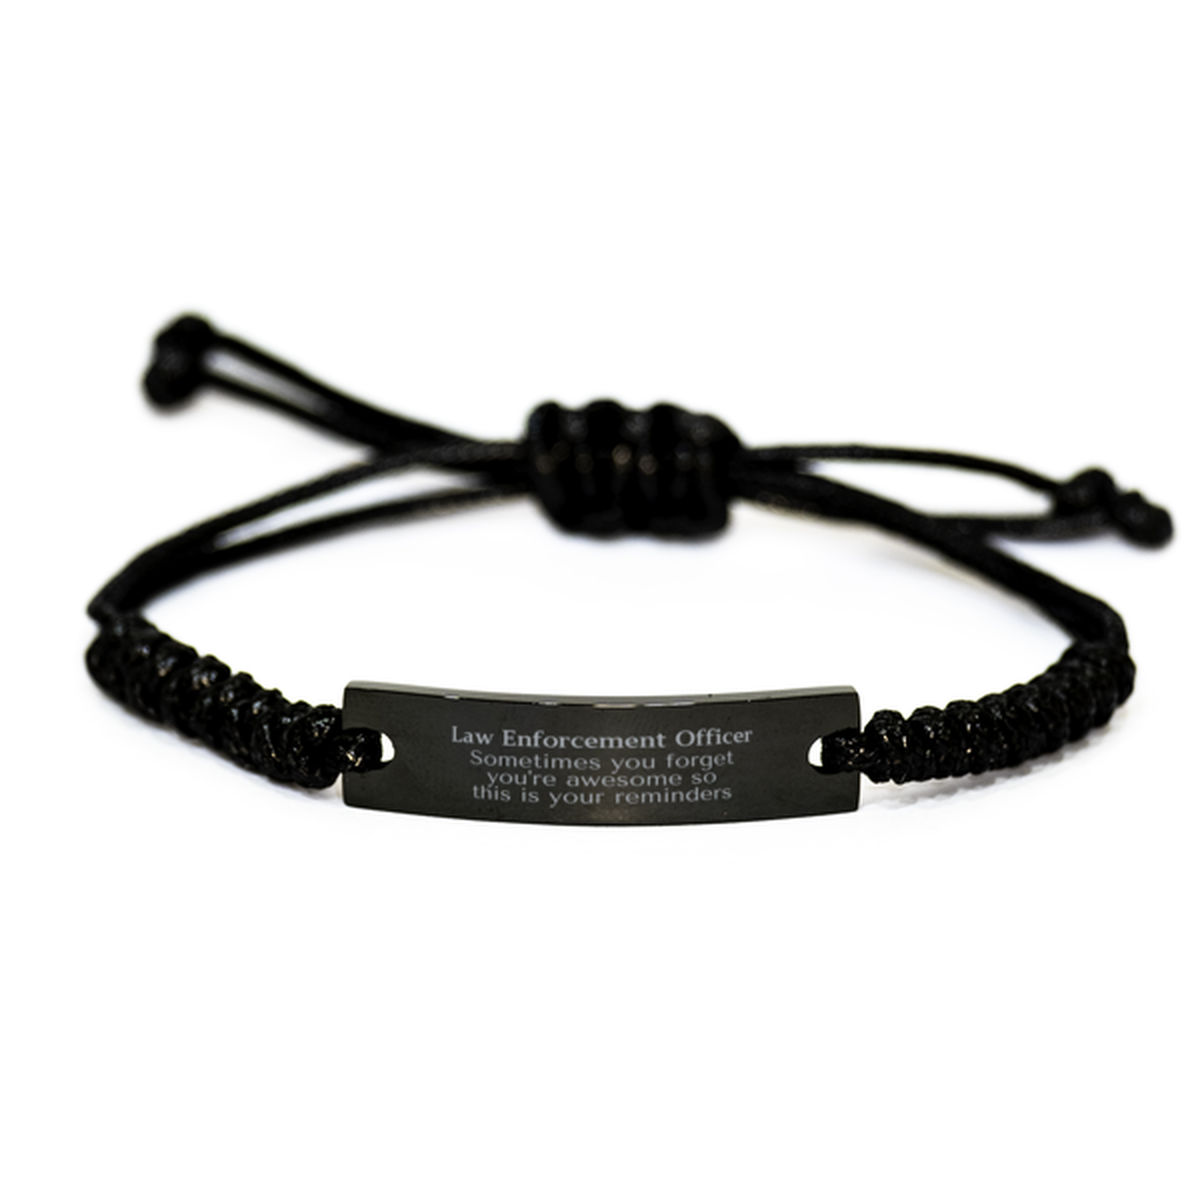 Sentimental Law Enforcement Officer Black Rope Bracelet, Law Enforcement Officer Sometimes you forget you're awesome so this is your reminders, Graduation Christmas Birthday Gifts for Law Enforcement Officer, Men, Women, Coworkers